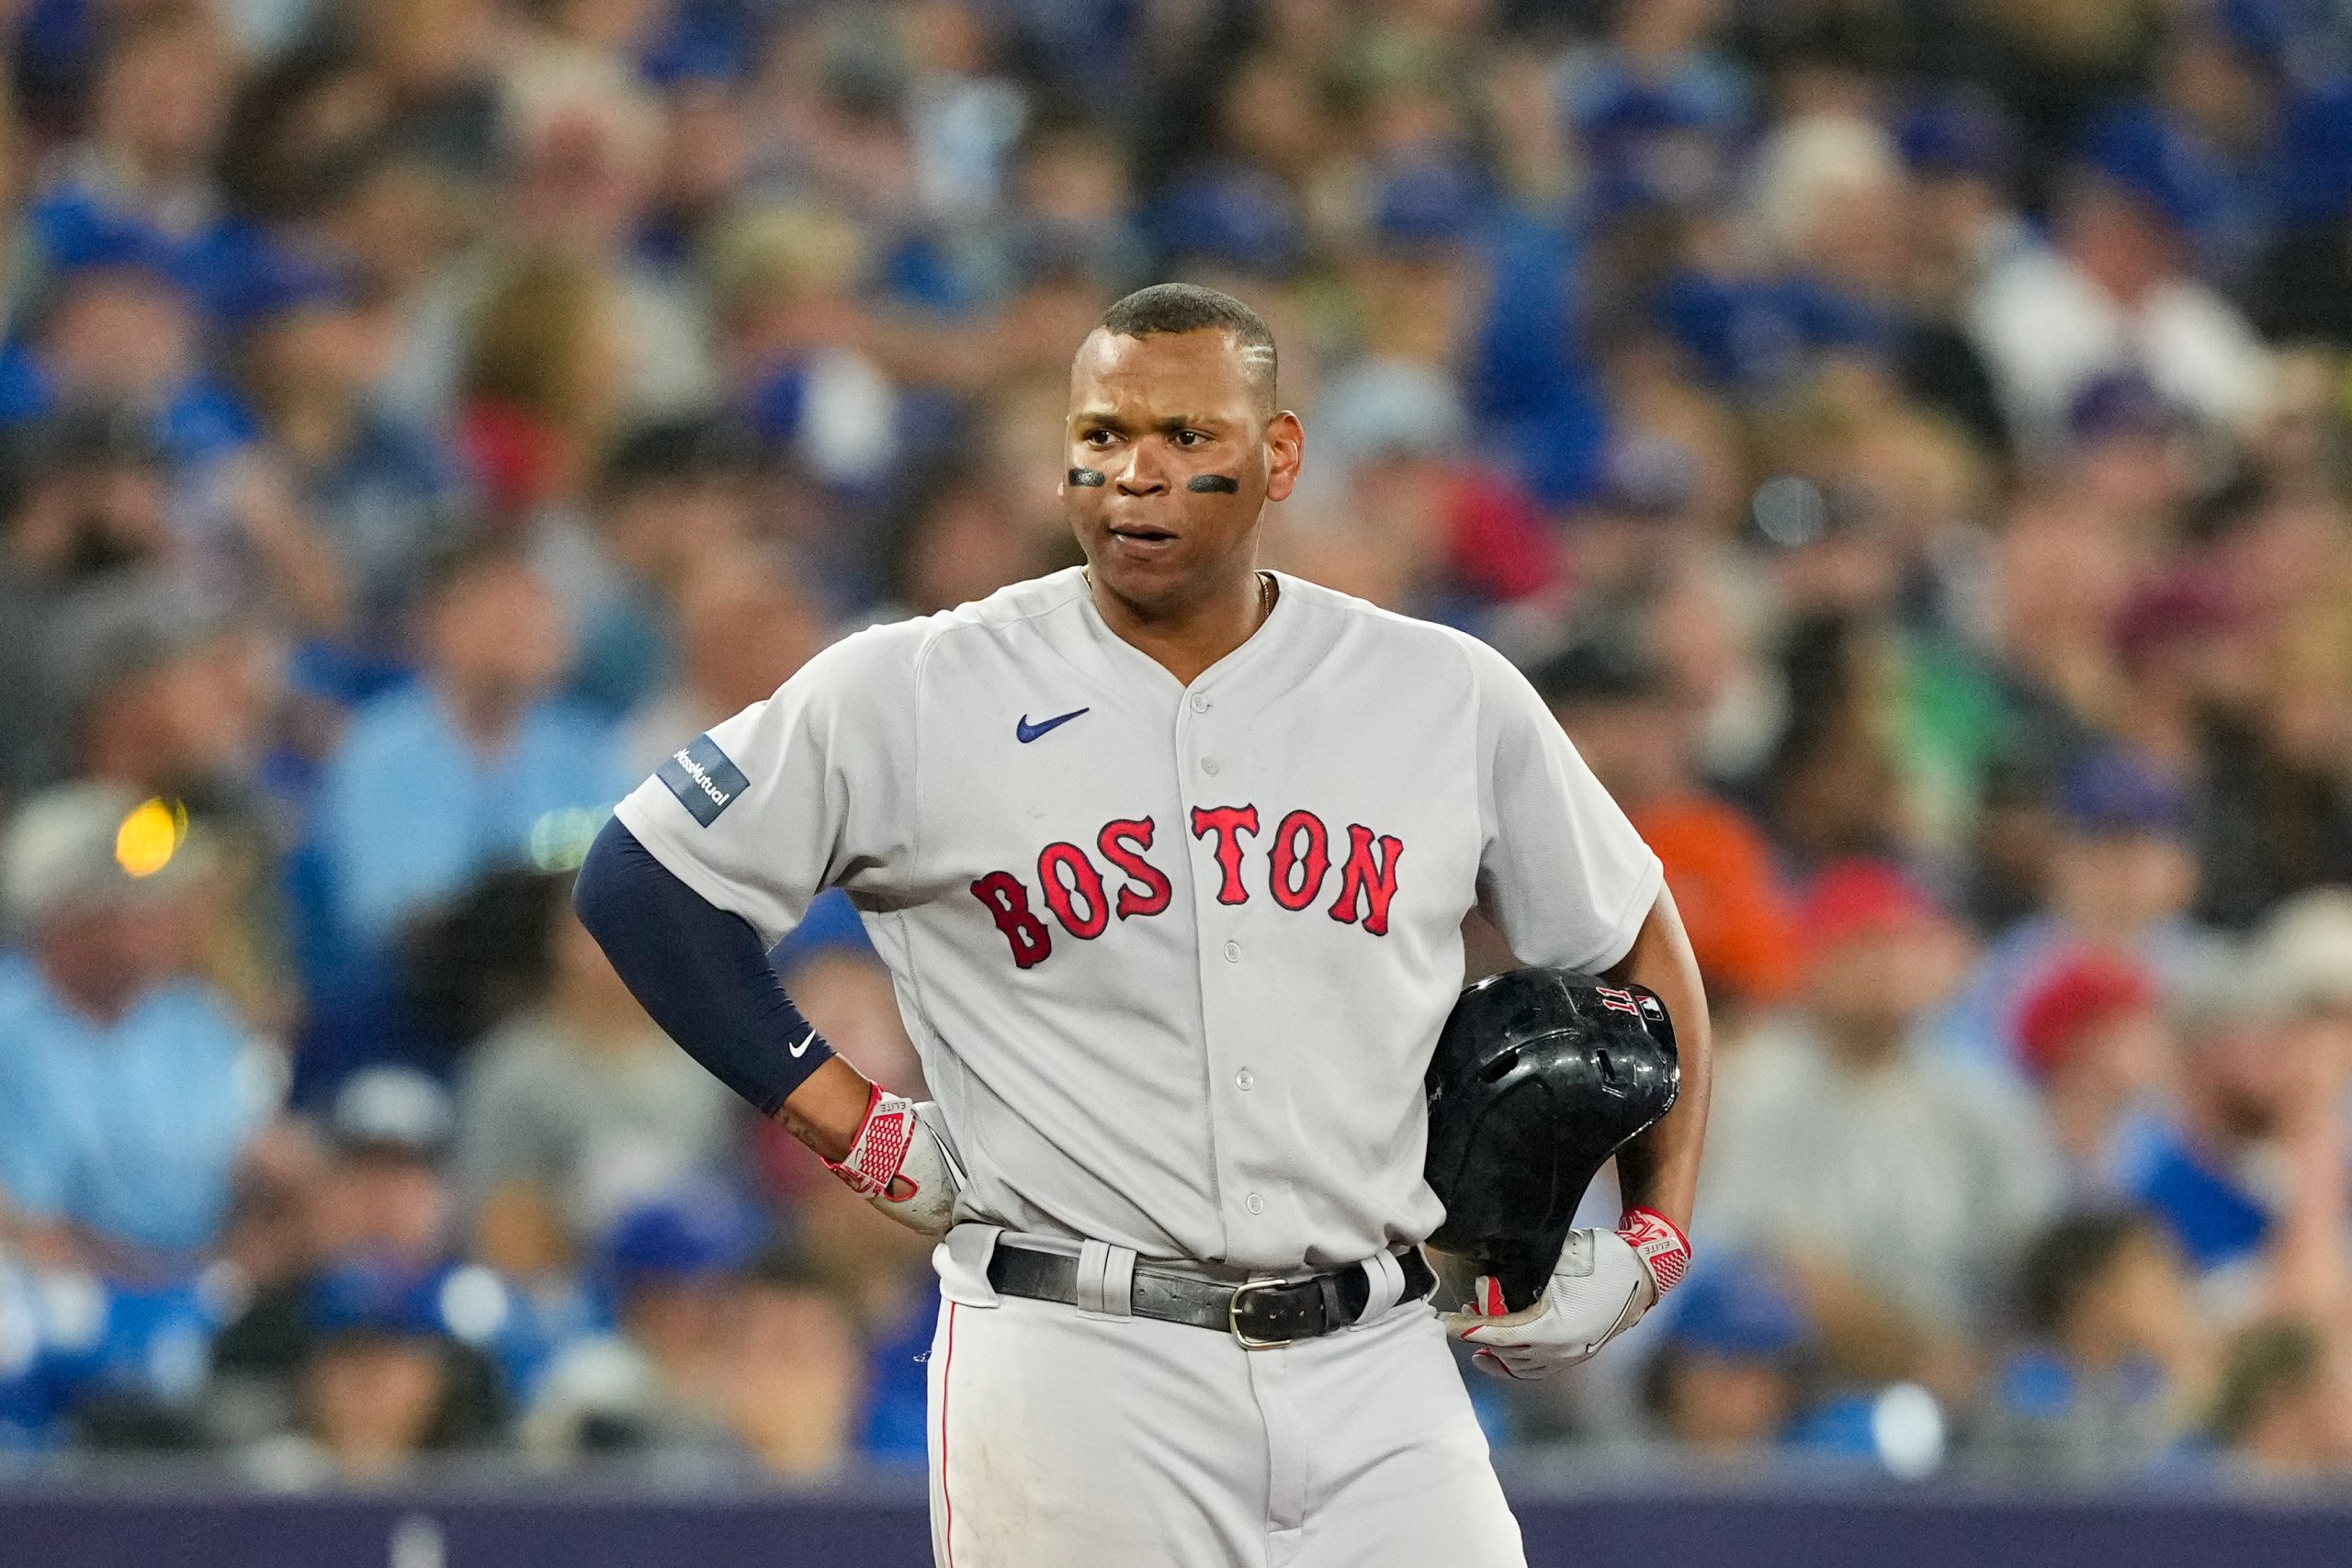 Red Sox star third baseman Rafael Devers ripped the team's front office, bluntly saying "they know what we need" to improve. Mandatory Credit: Kevin Sousa-USA TODAY Sports